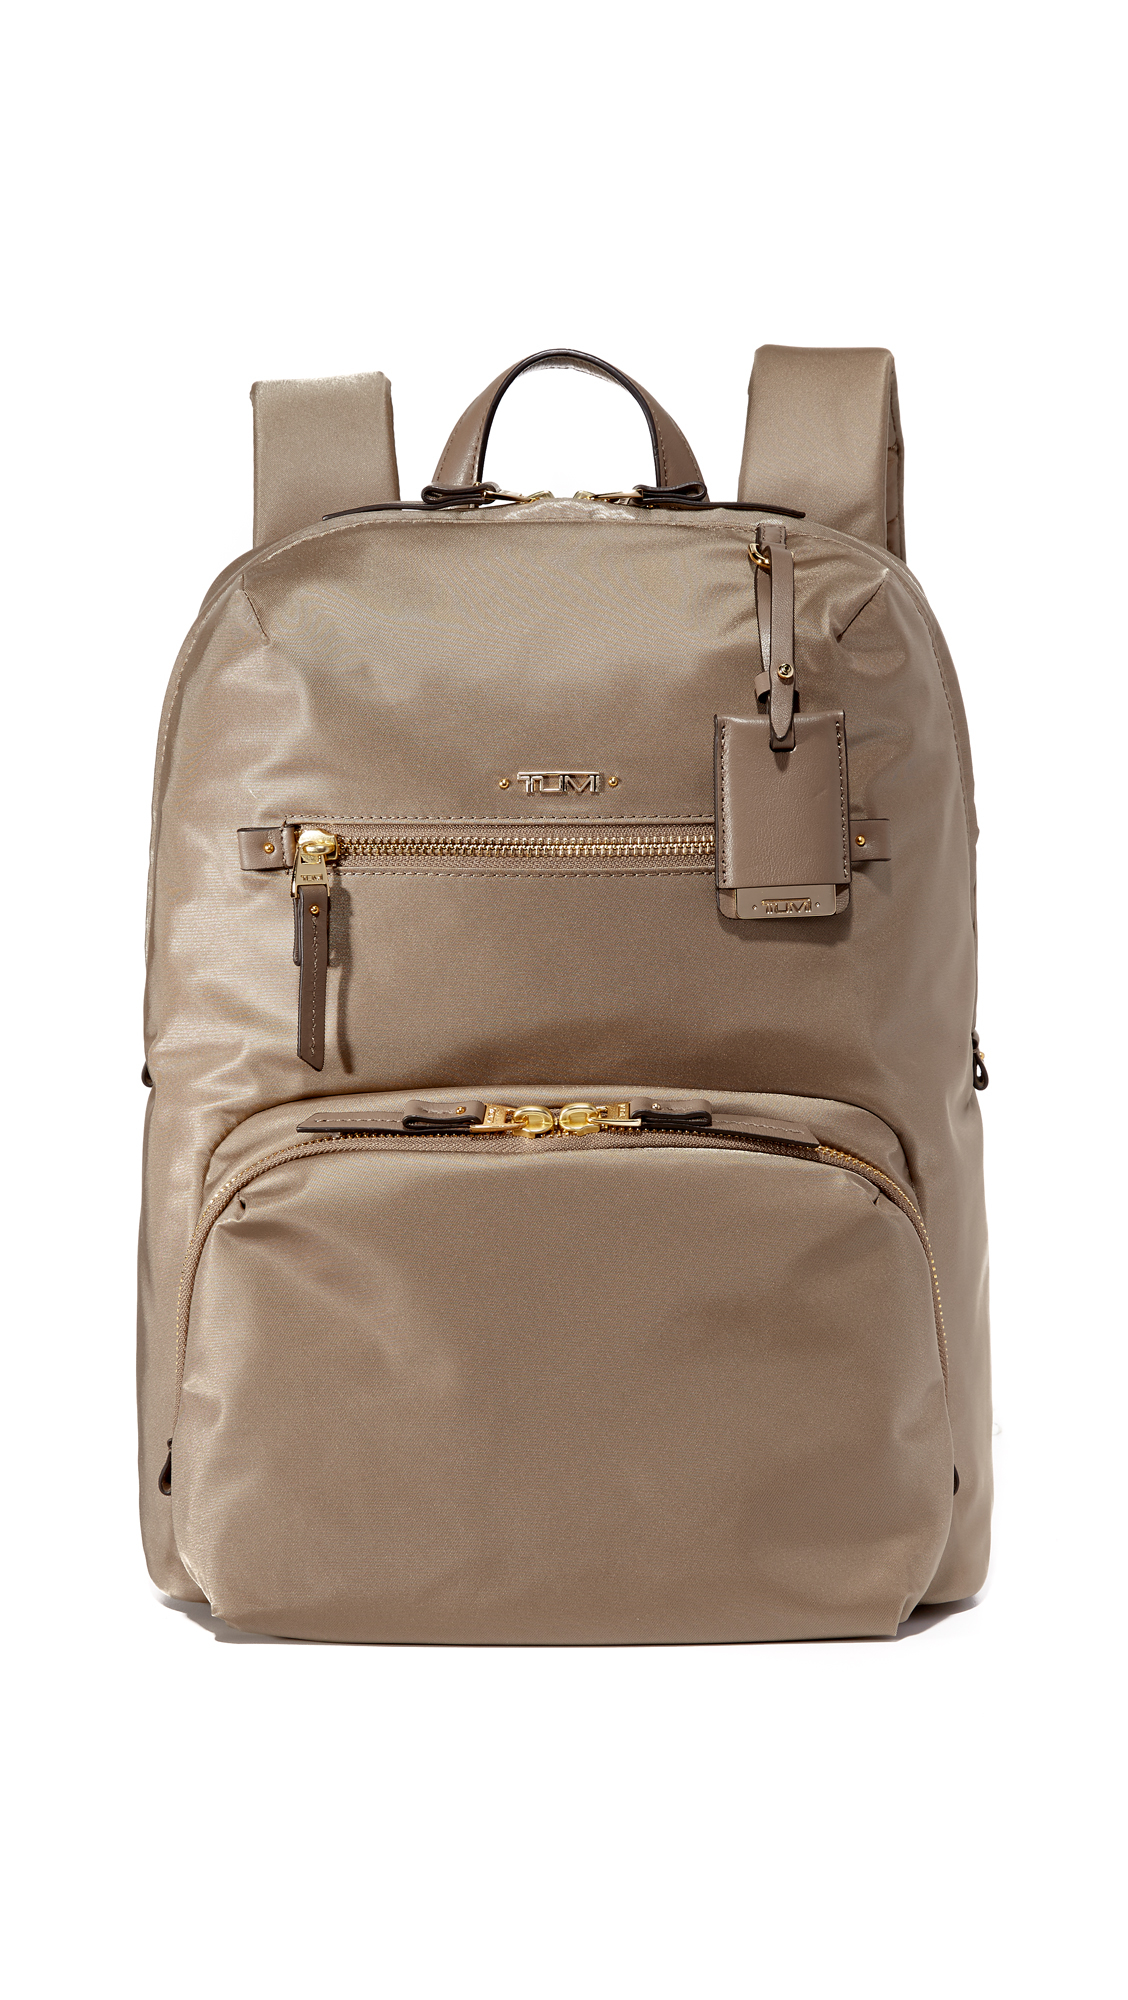 Tumi Blue Backpack. TUMI - Alpha Bravo Search Backpack - Laptop ...